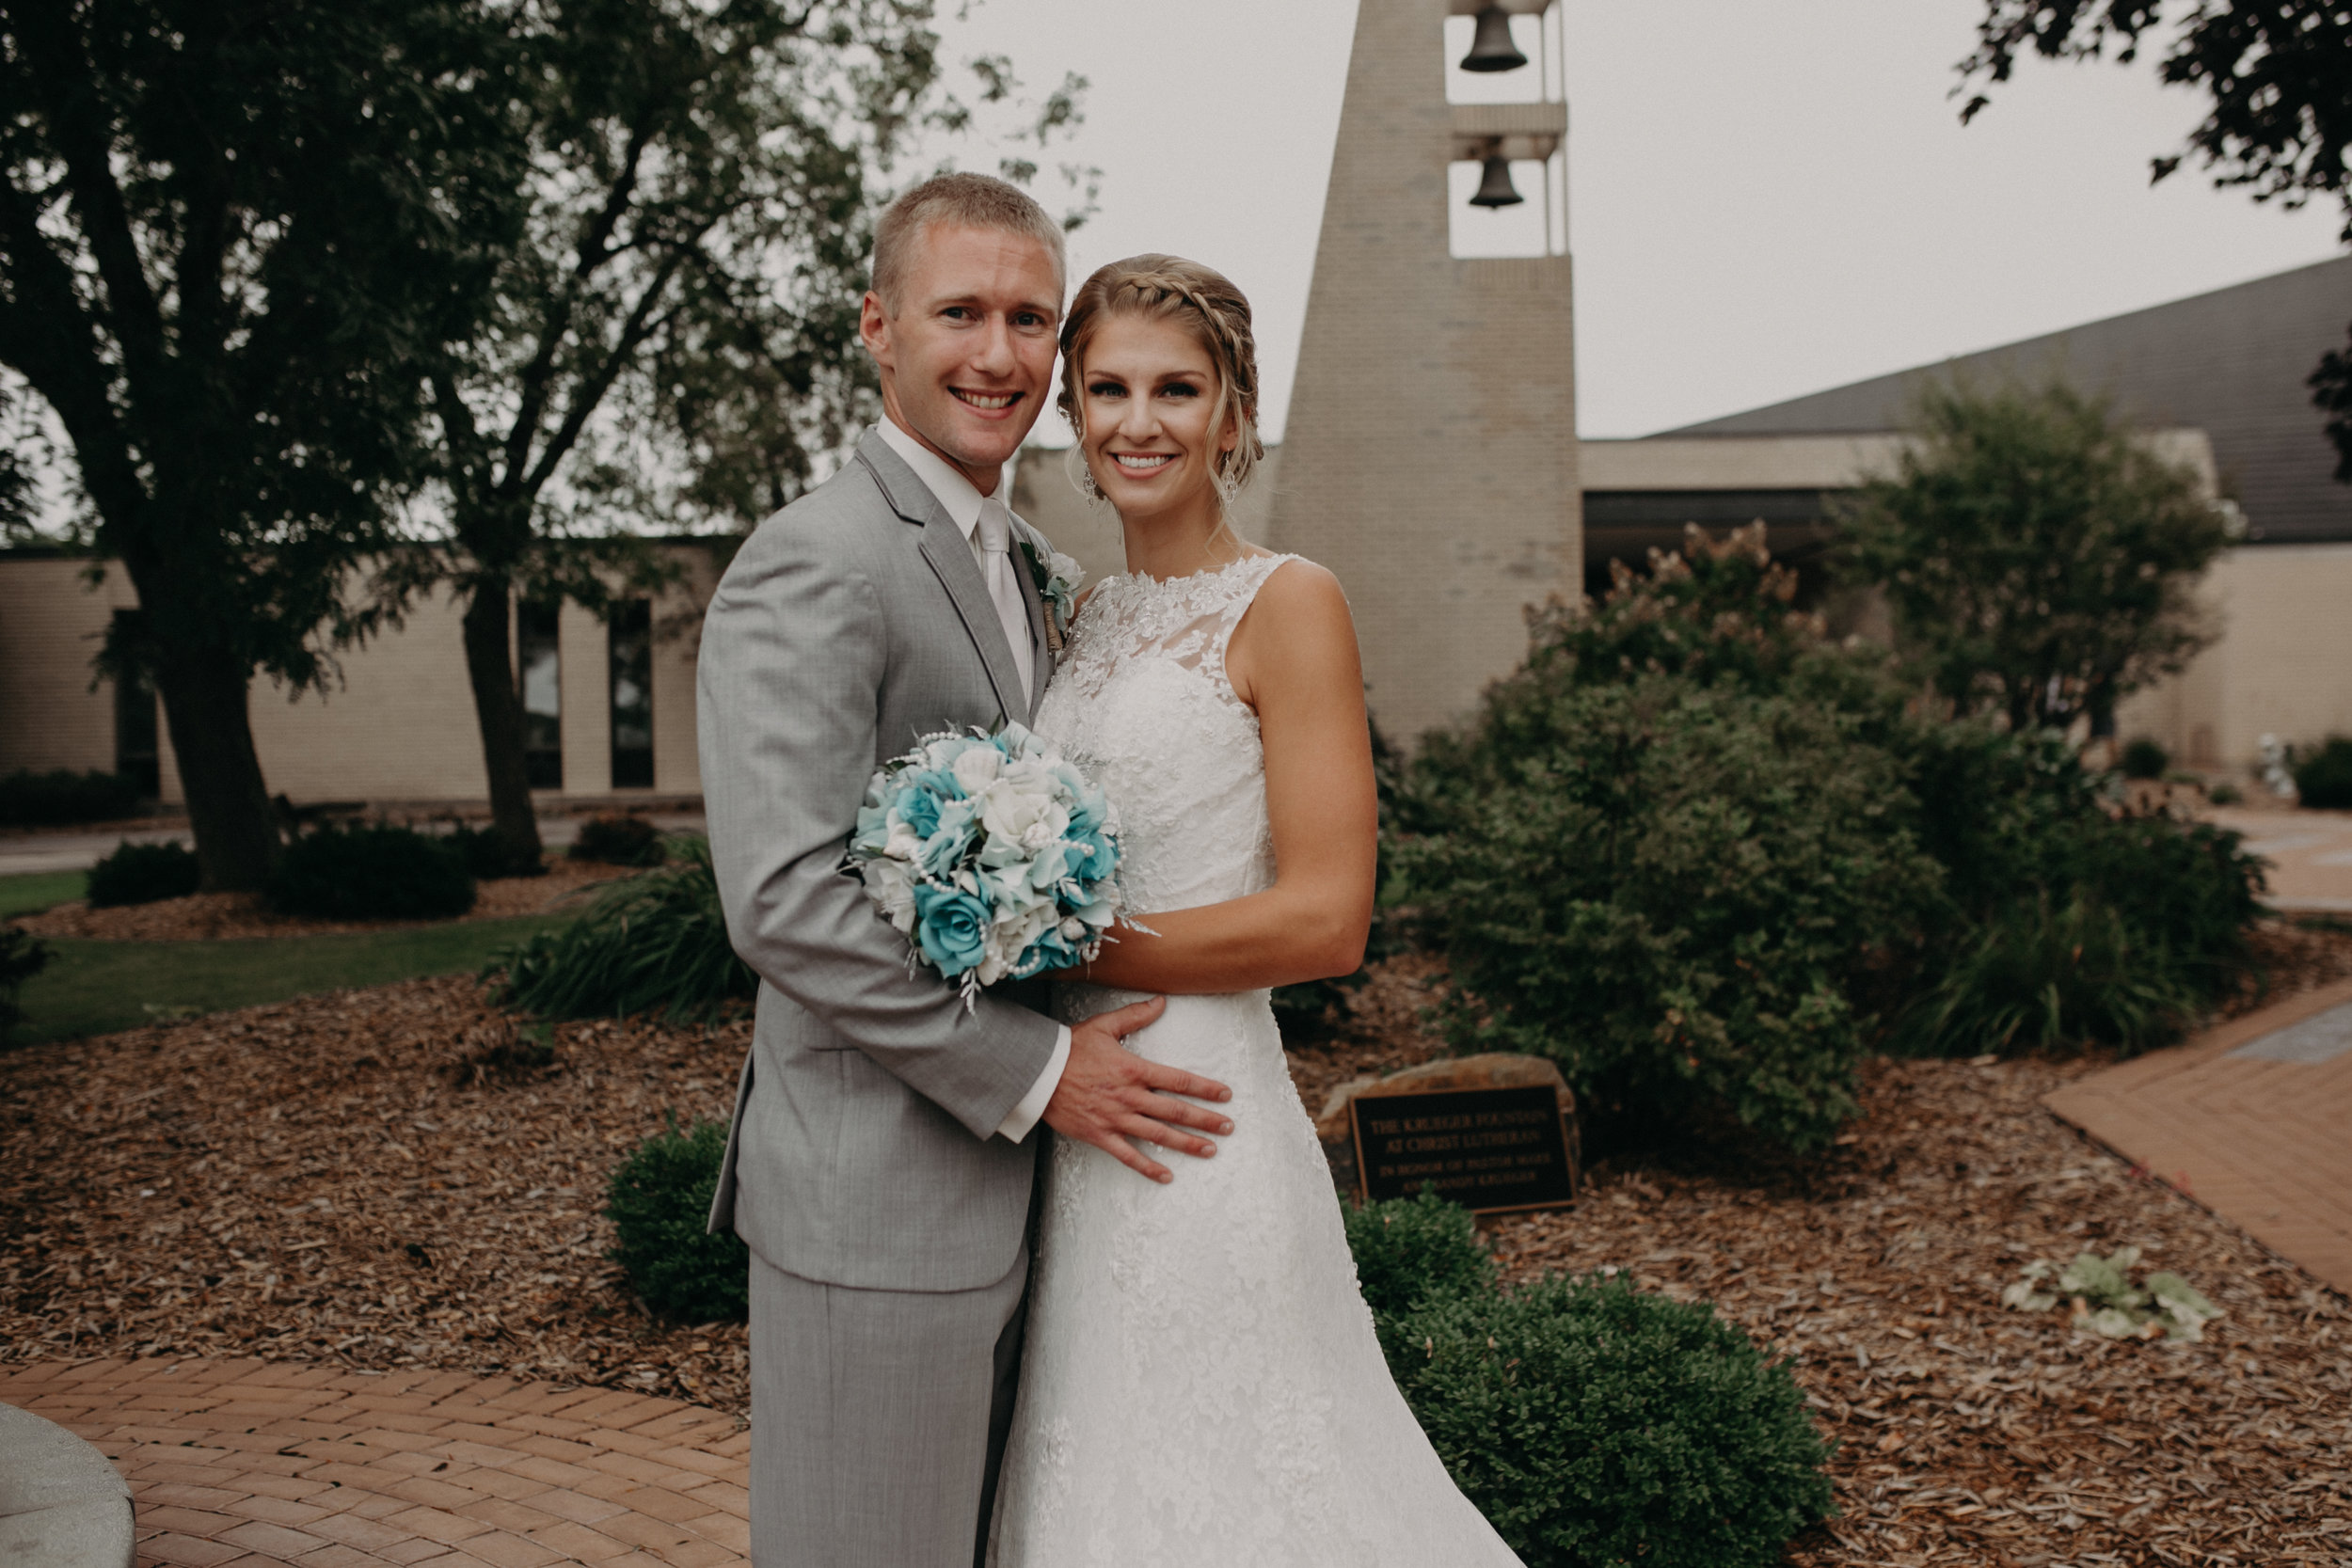  Lenz couple gets married at Christ Lutheran Church in Marshfield WI 